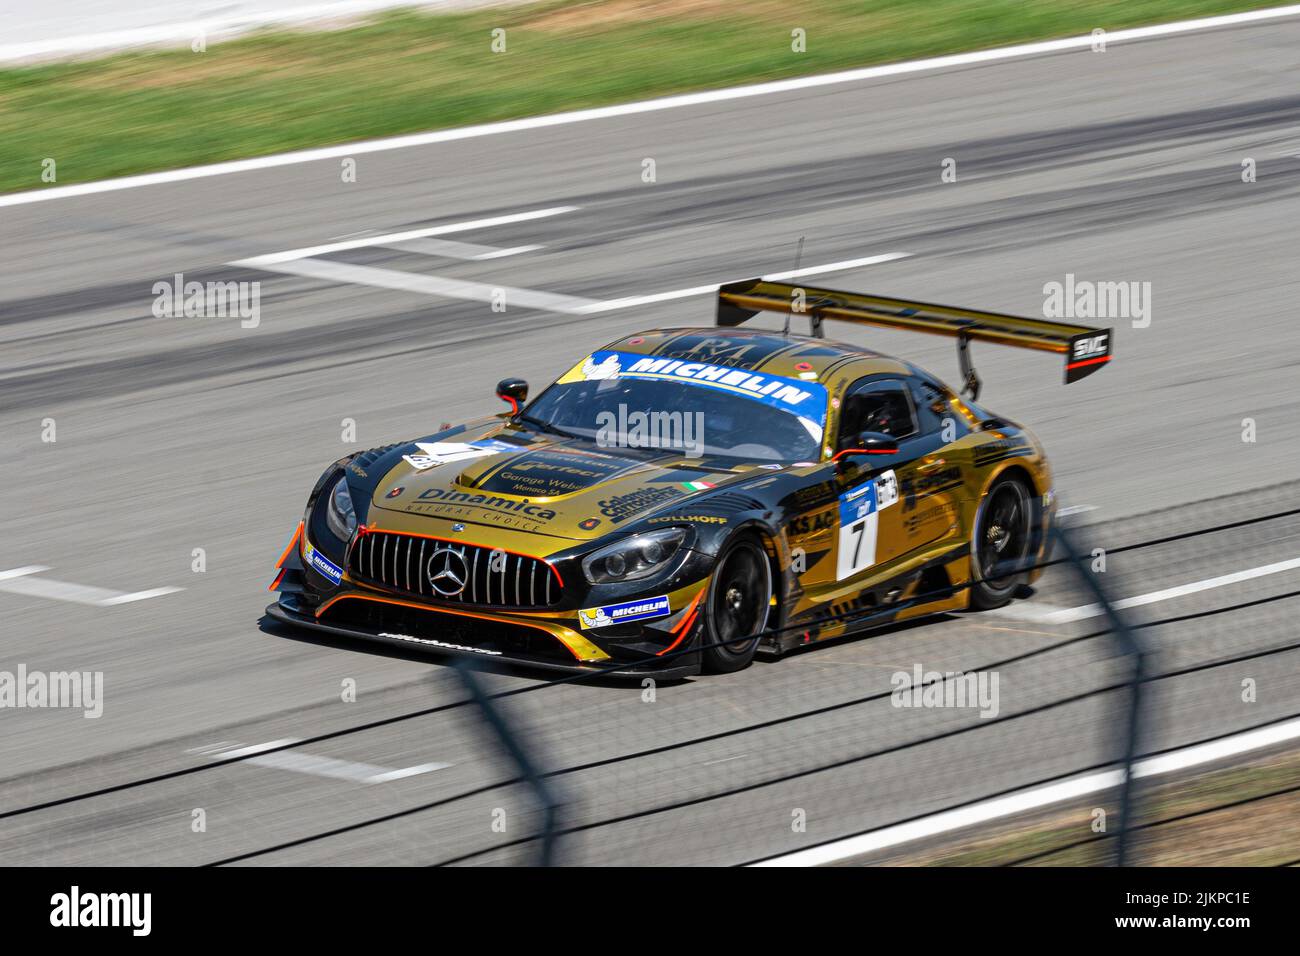 Fast race car in the wet track, Mercedes Benz AMG GT3 Stock Photo